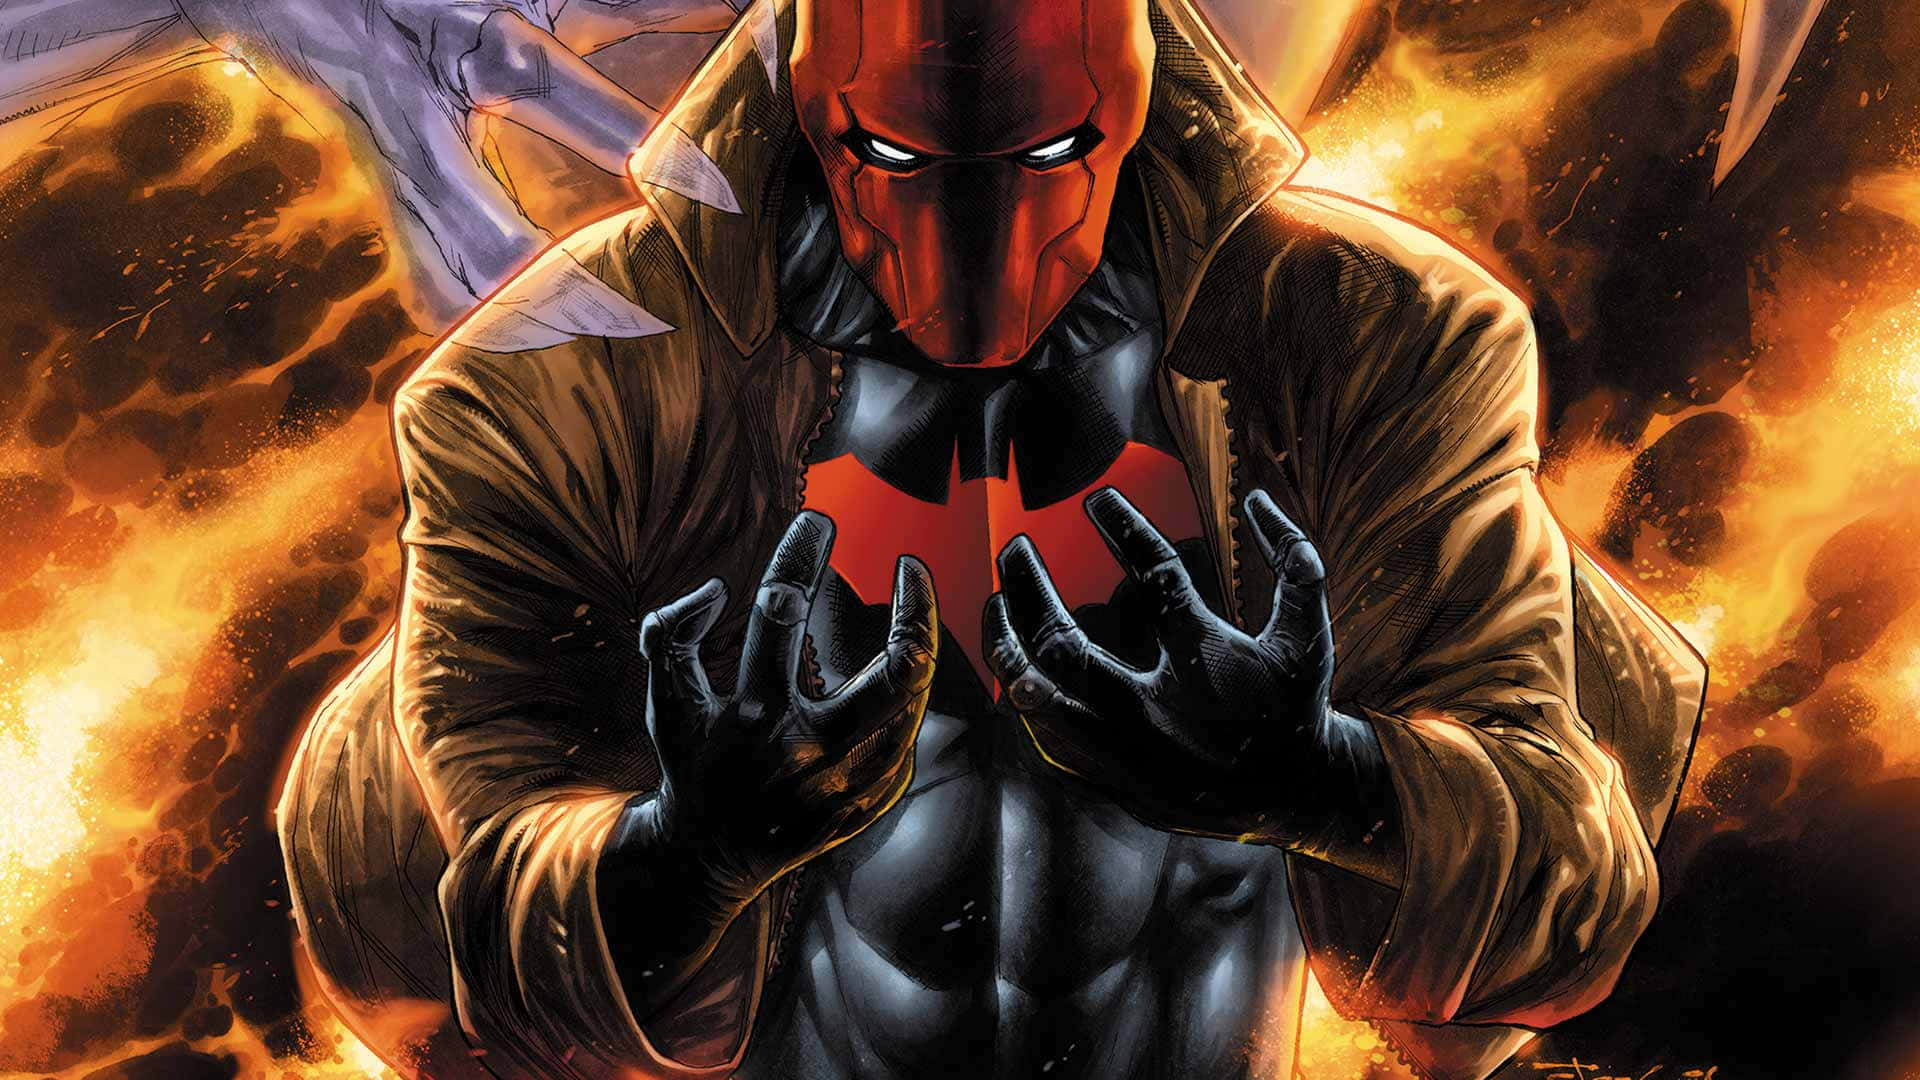 Red Hood stands triumphantly amongst danger